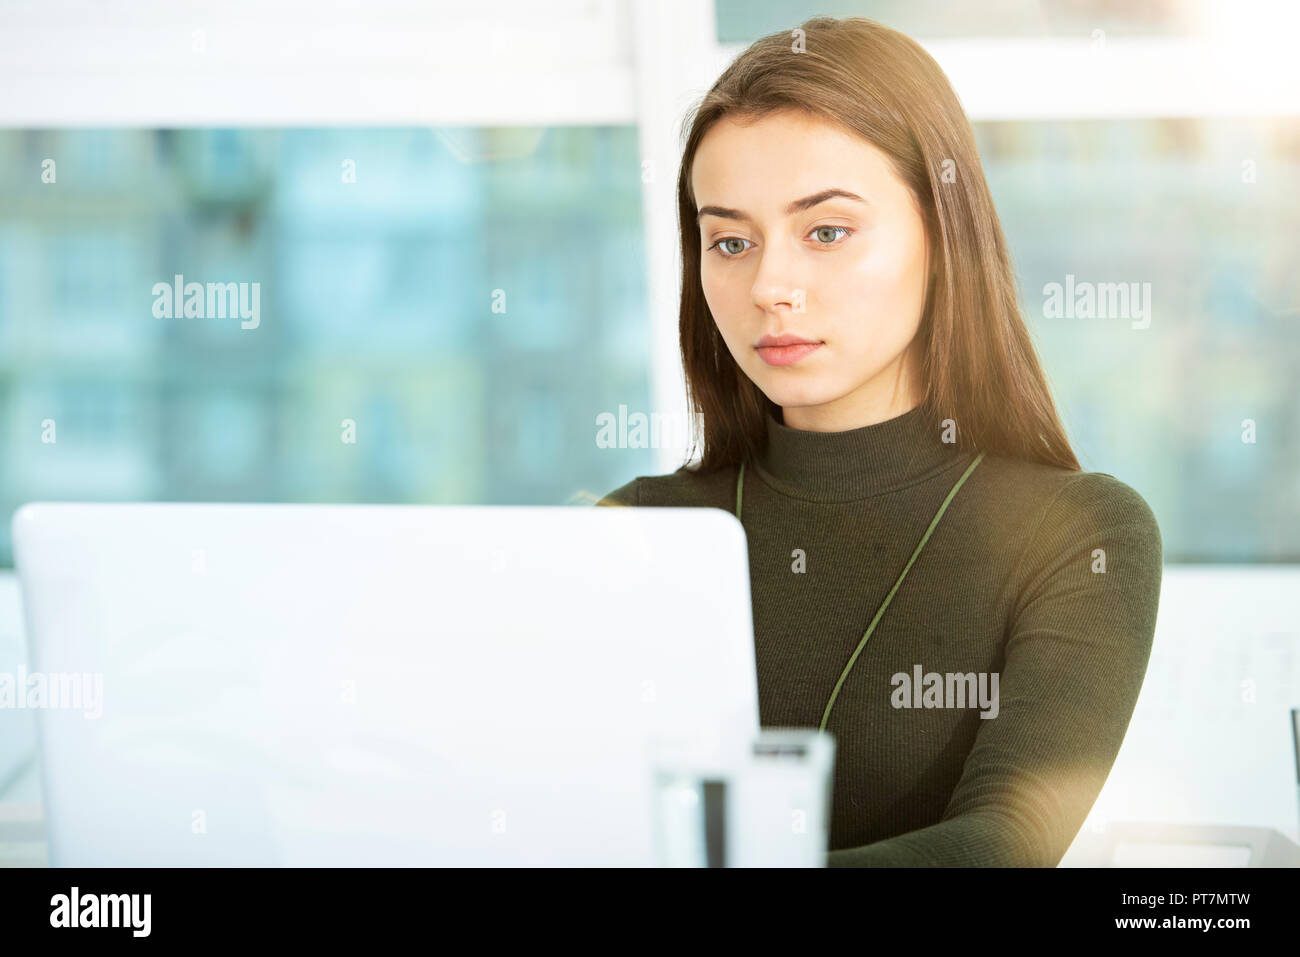 Girl works on a laptop in office Stock Photo